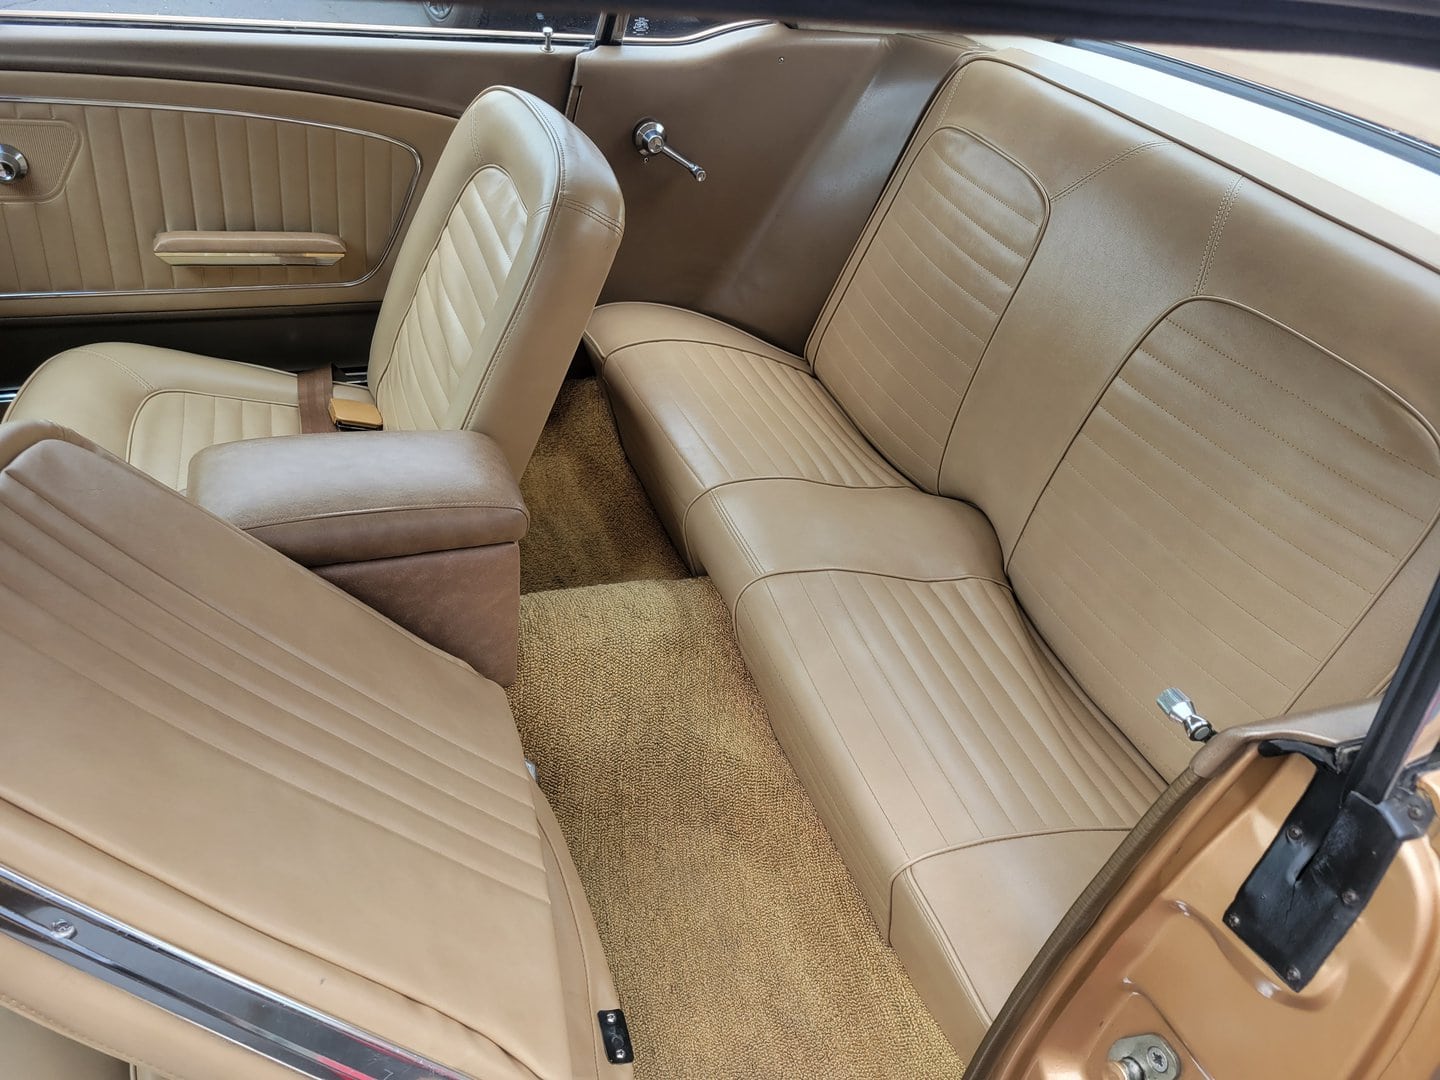 The interior of a 1965 Ford Mustang car with leather seats.